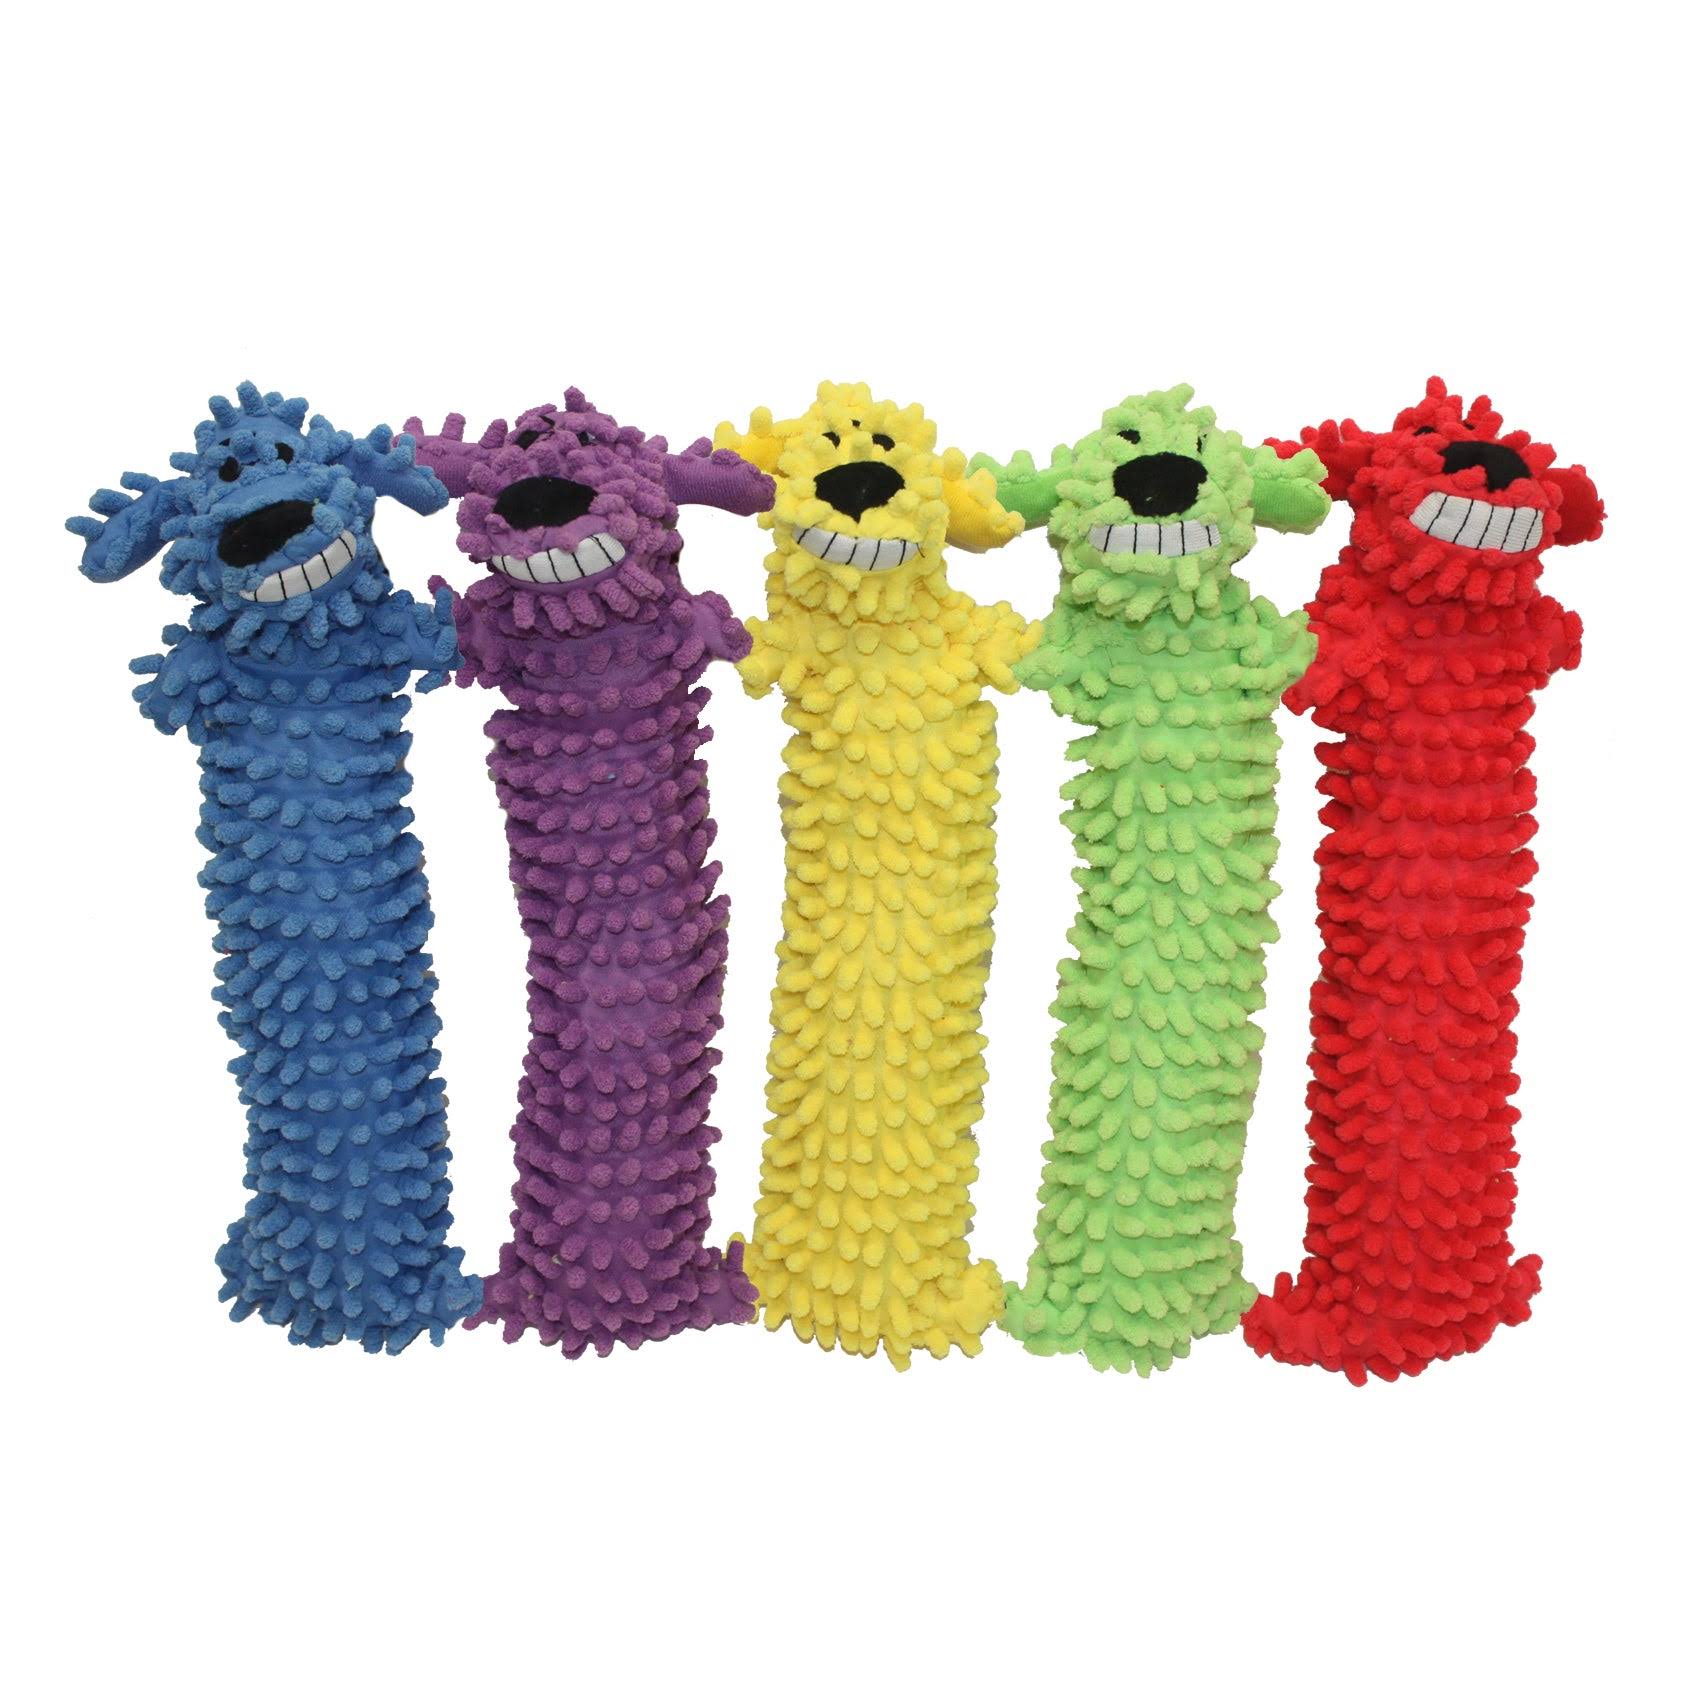 Multipet's Floppy Loofa Light Weight No Stuffing Dog Toys - 18", Assorted Colors